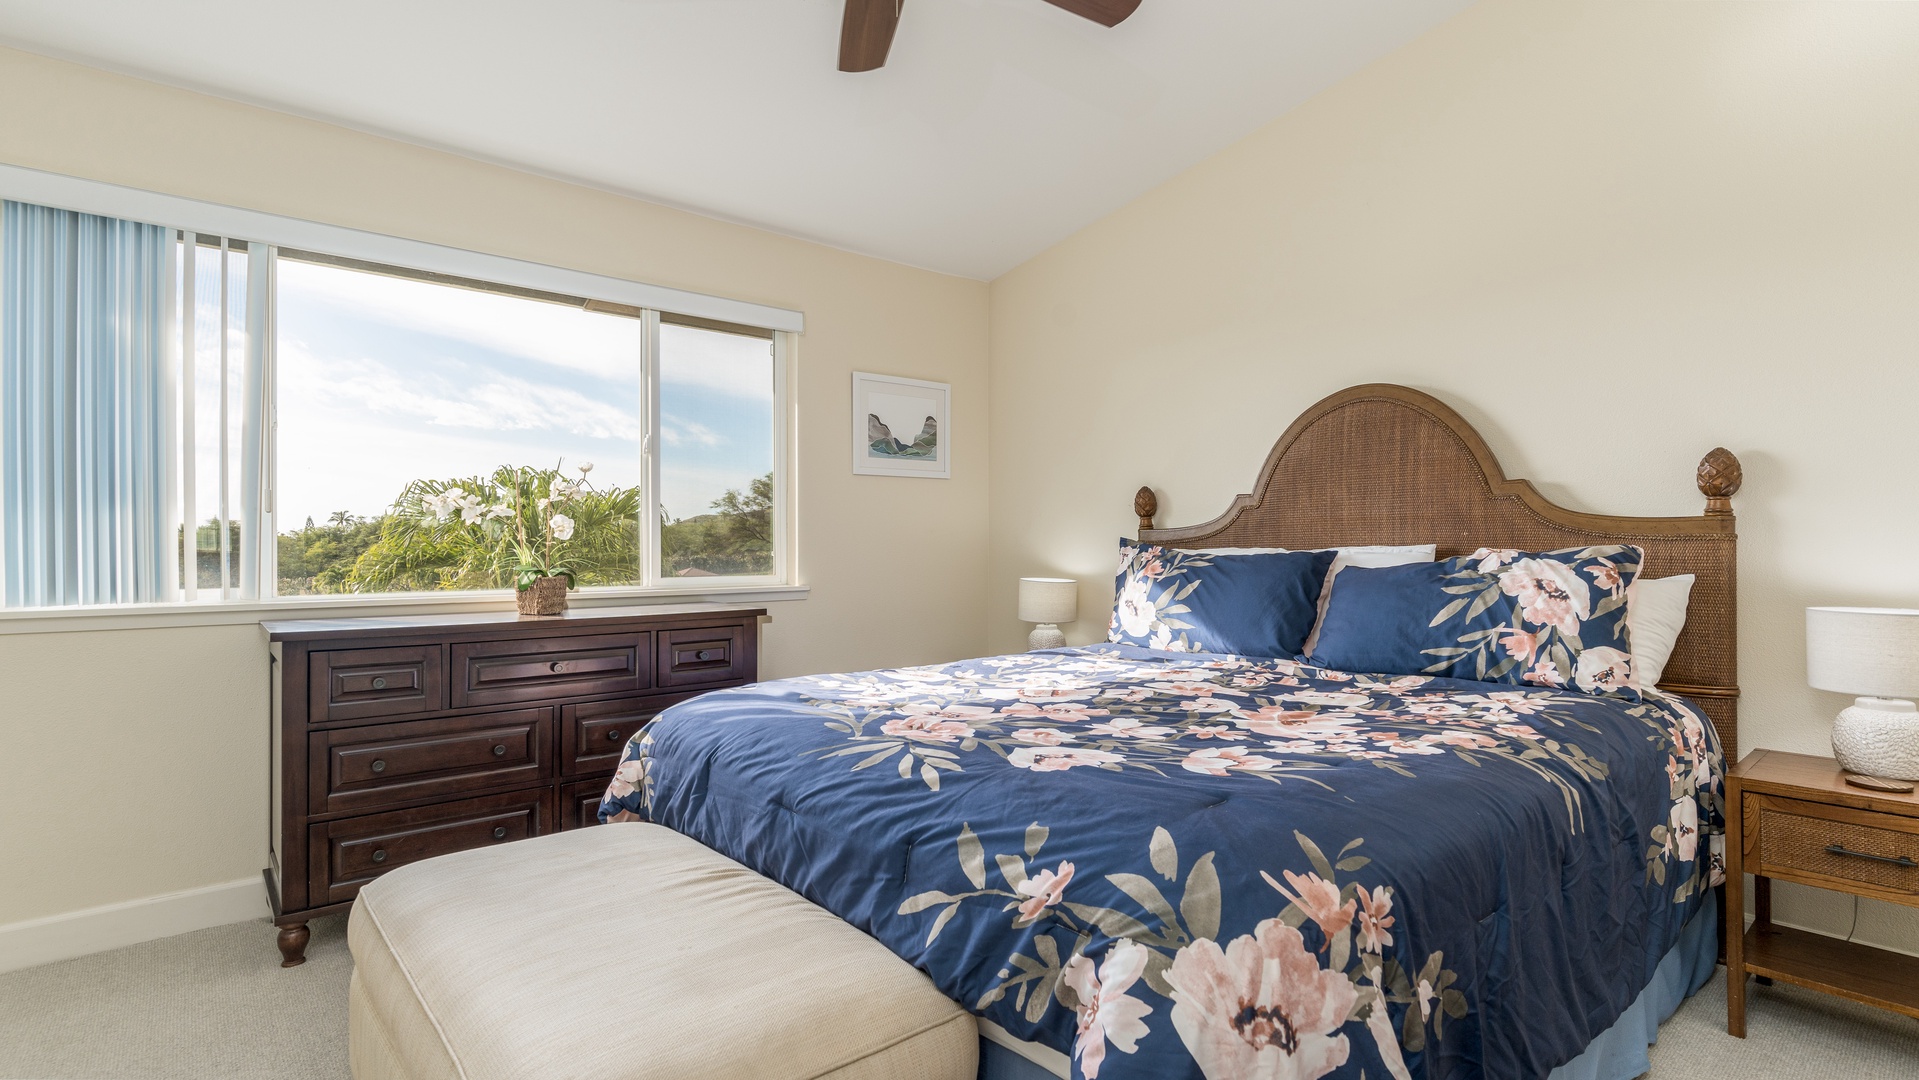 Kapolei Vacation Rentals, Hillside Villas 1496-3 - The Primary Bedroom has a large window looking out over the rear yard, as well as its own flat-screen TV.